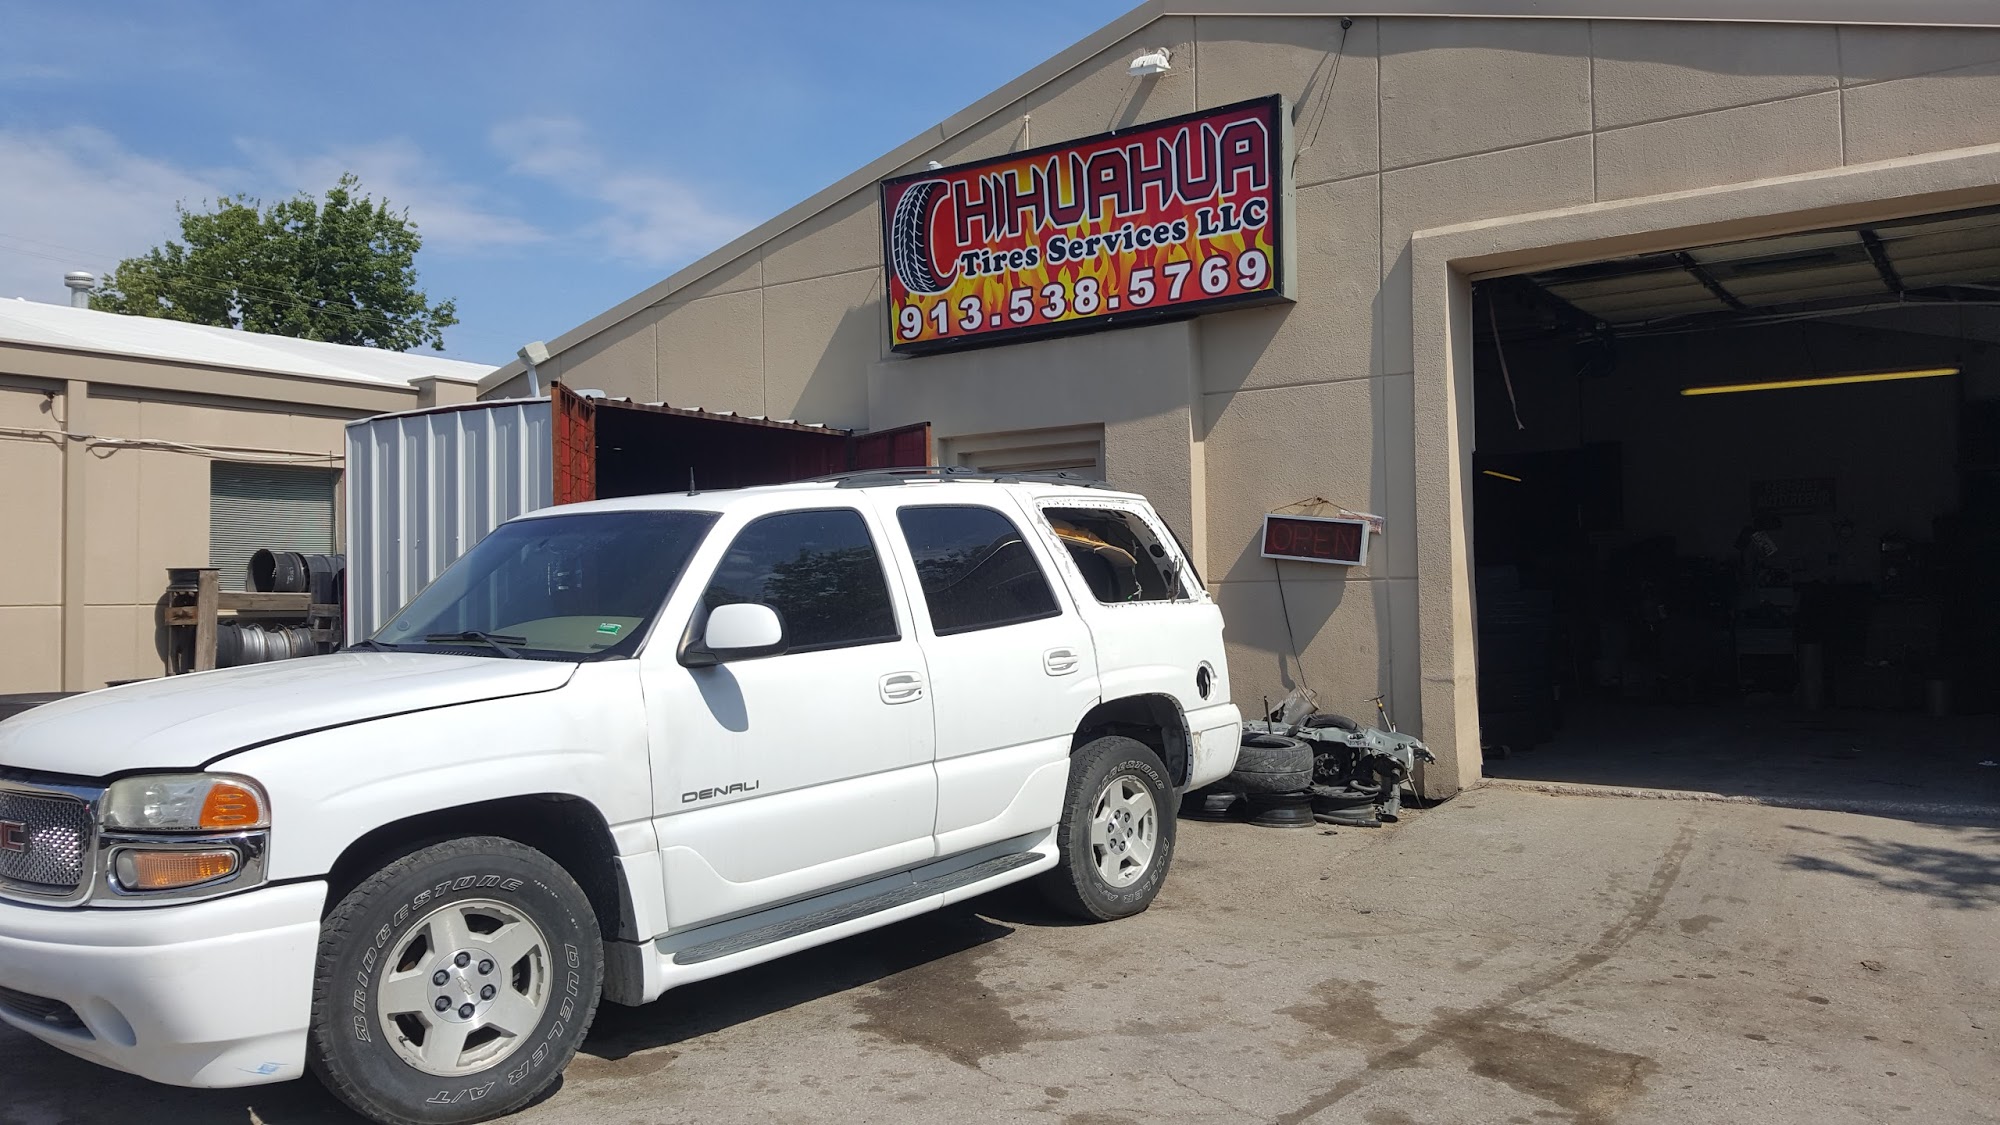 Chihuahua Tires Services LLC